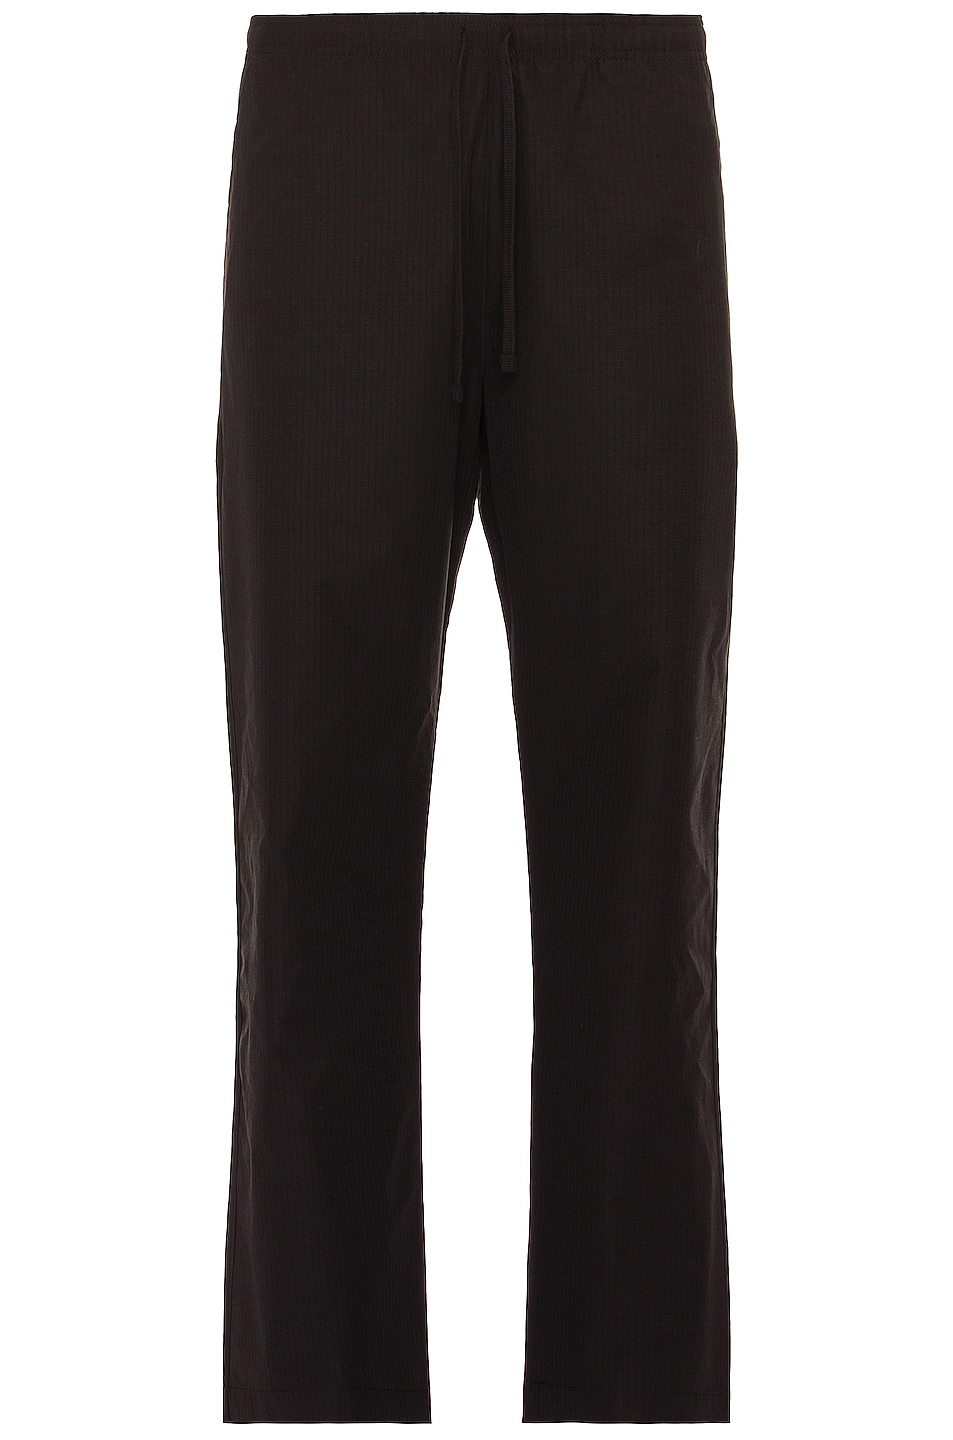 Image 1 of Reigning Champ Rugby Pant in Black